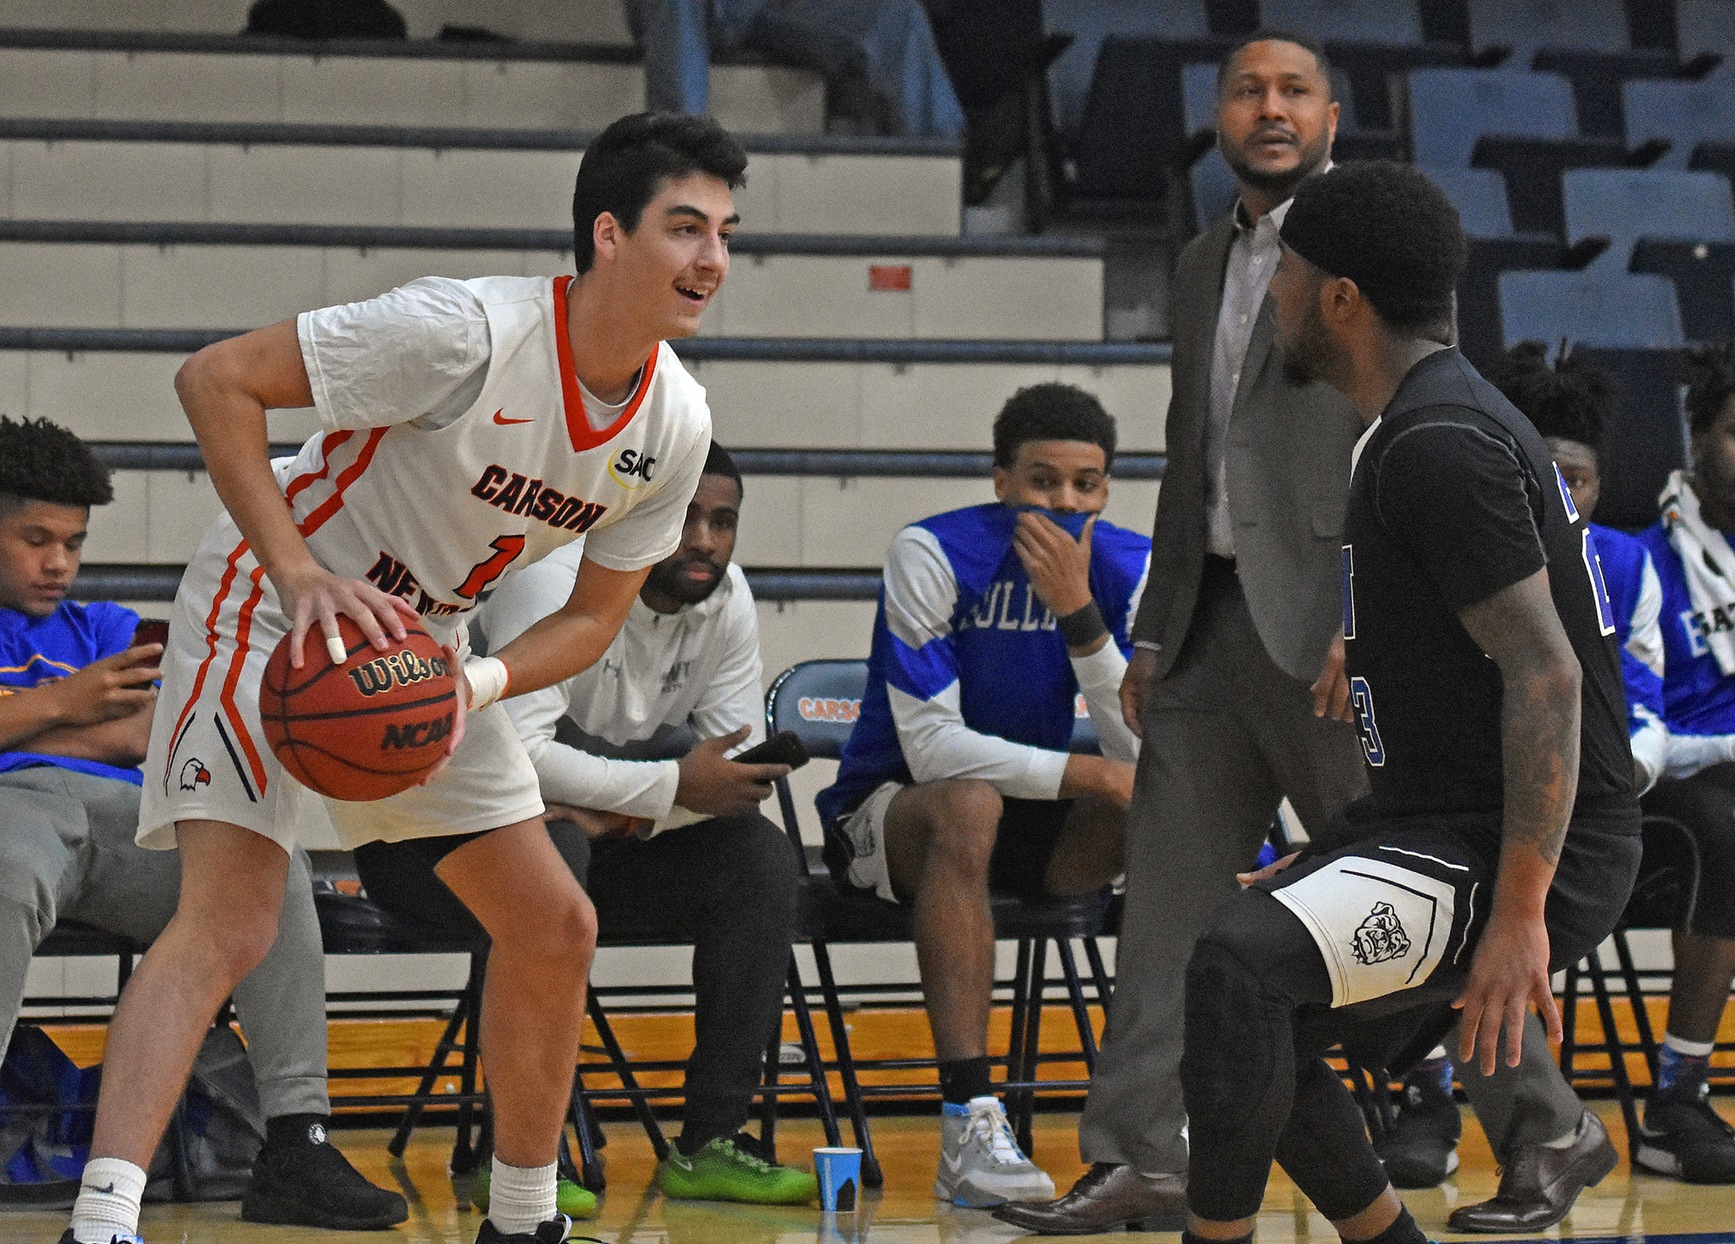 Eagles welcome league’s top scoring offense, Catawba to Holt Fieldhouse